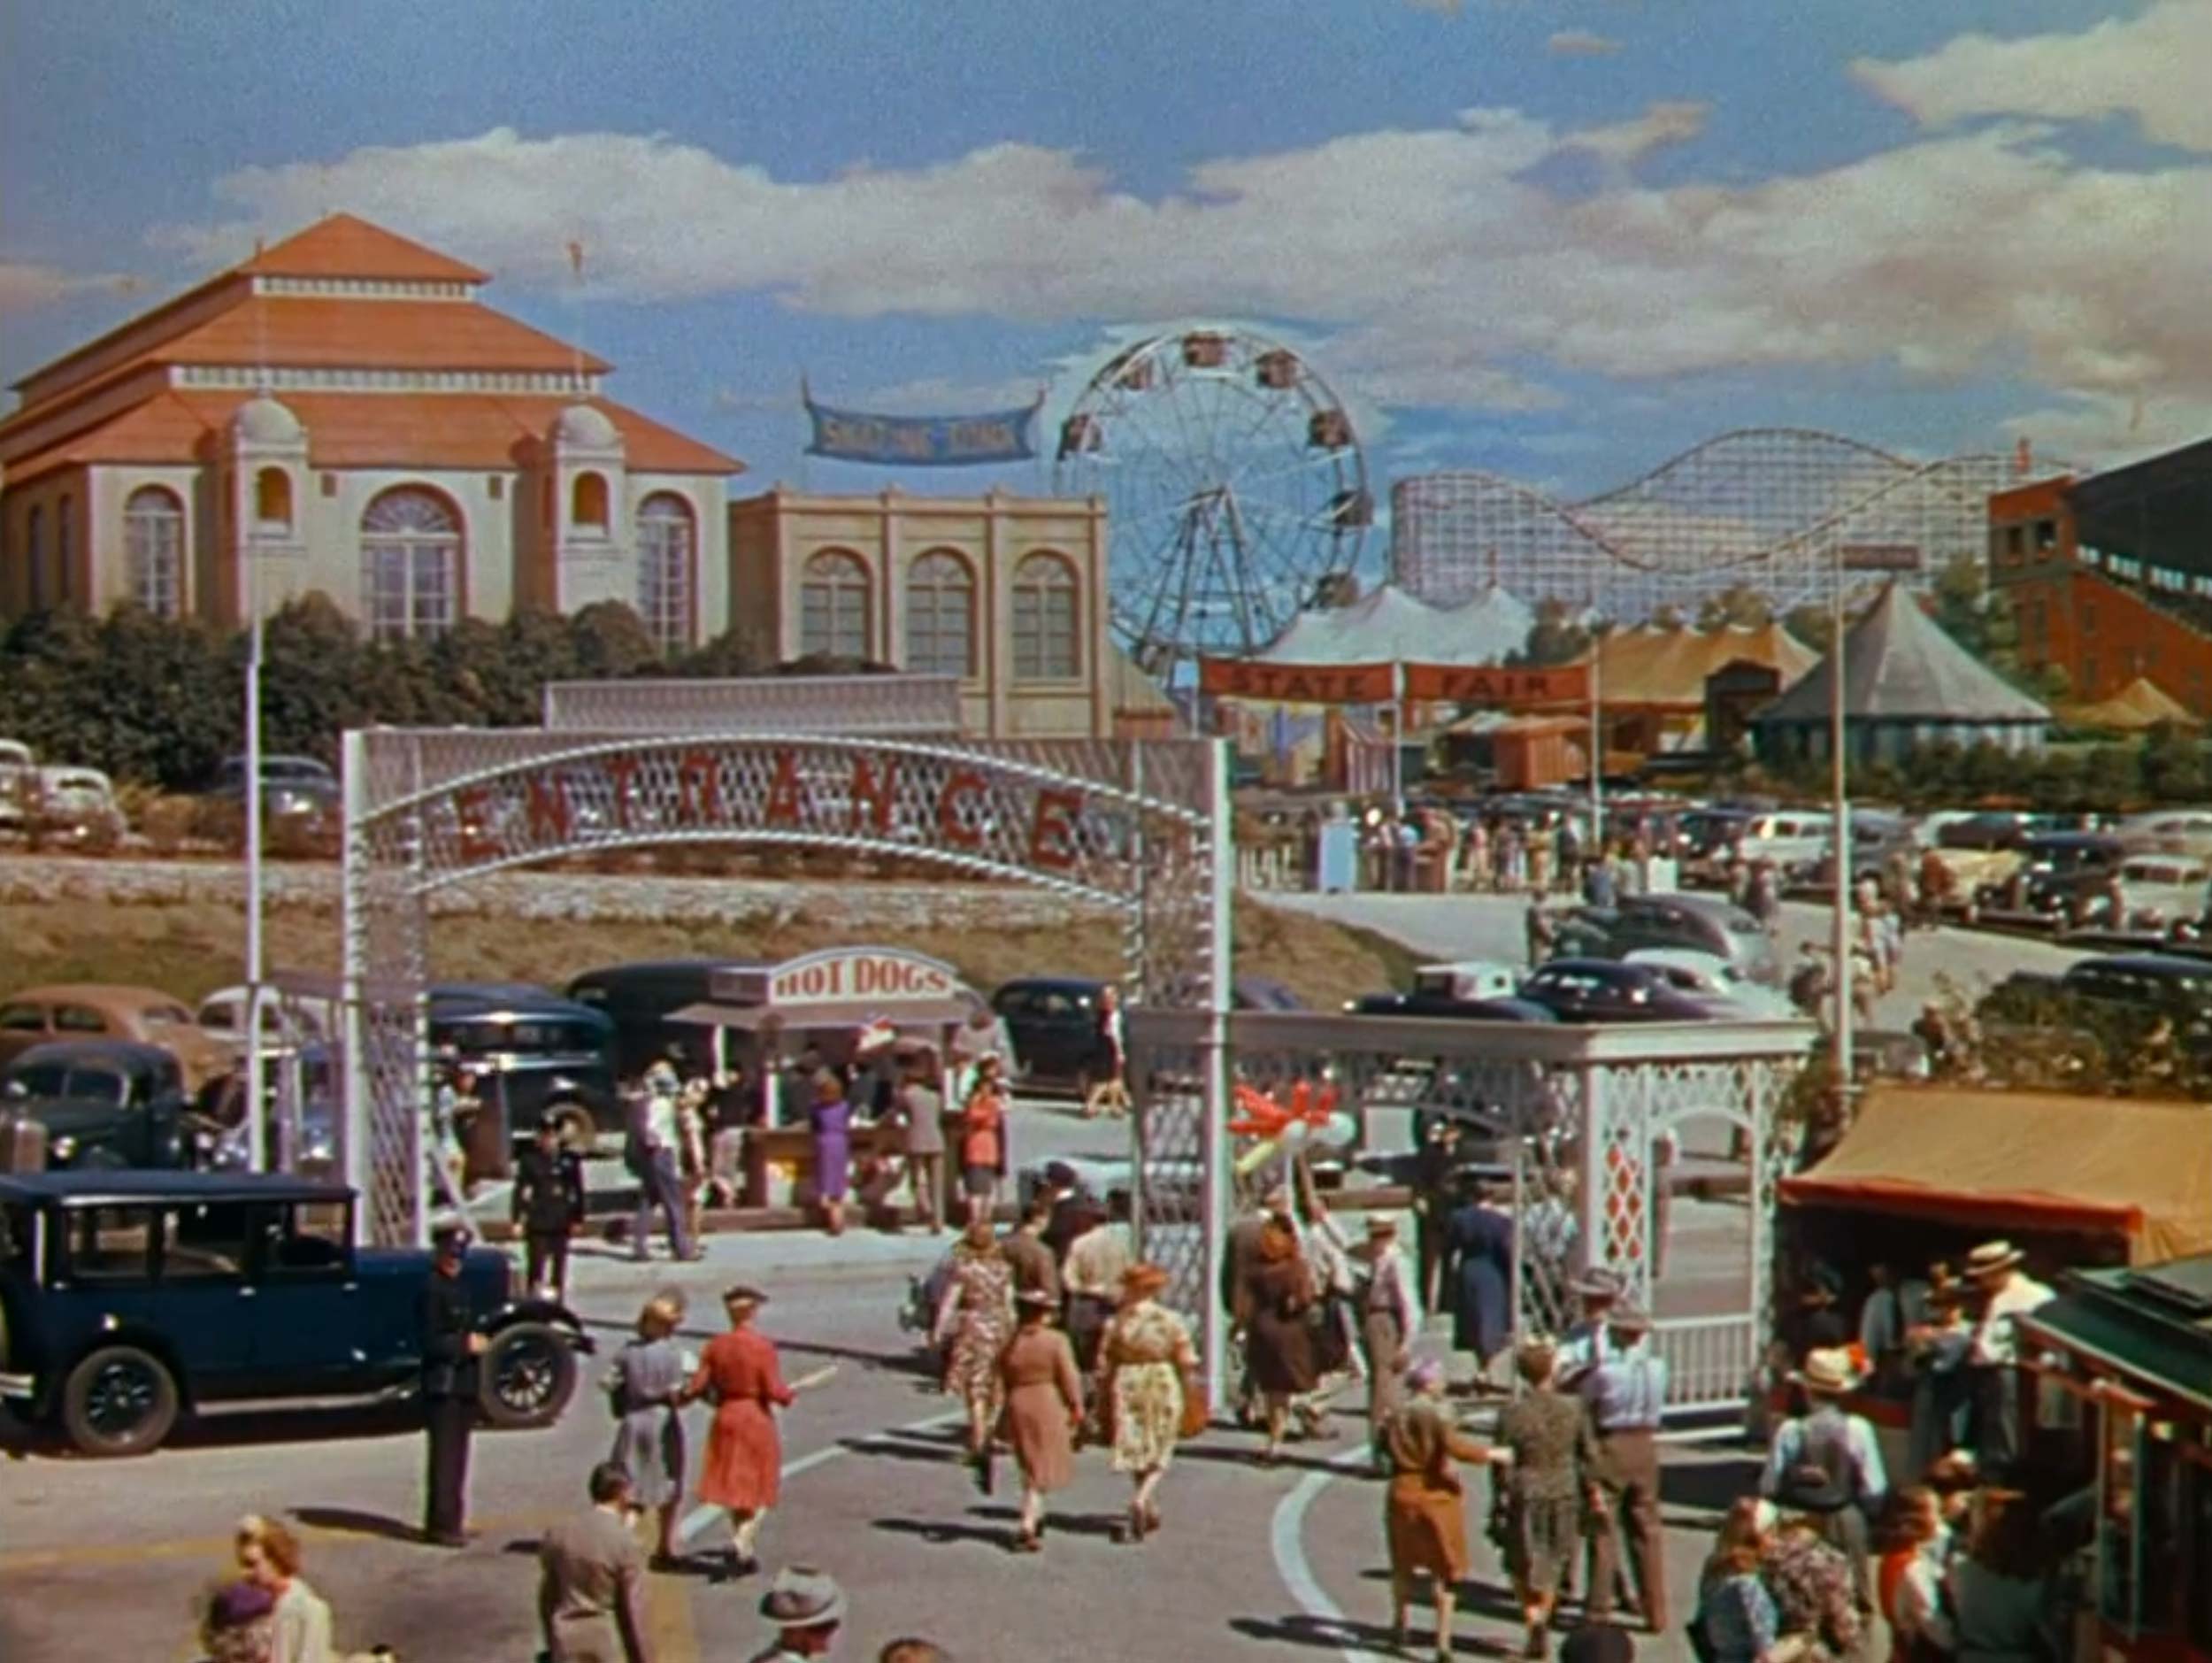 A photo from the 1945 film version of State Fair.